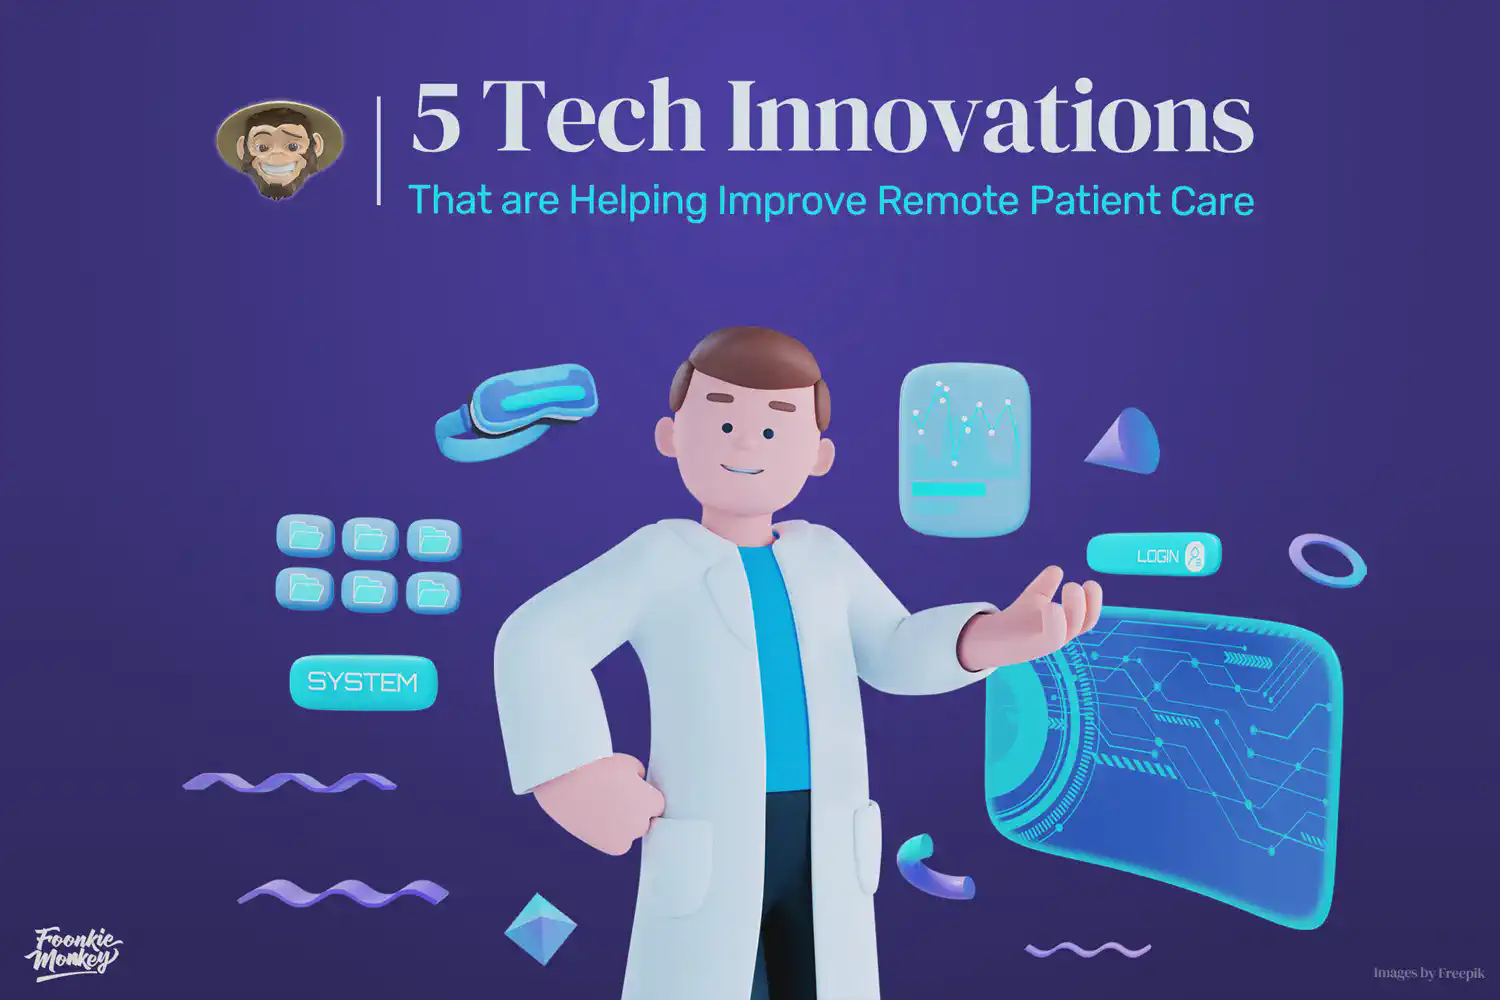 5 Tech innovations that are helping improve remote patient care